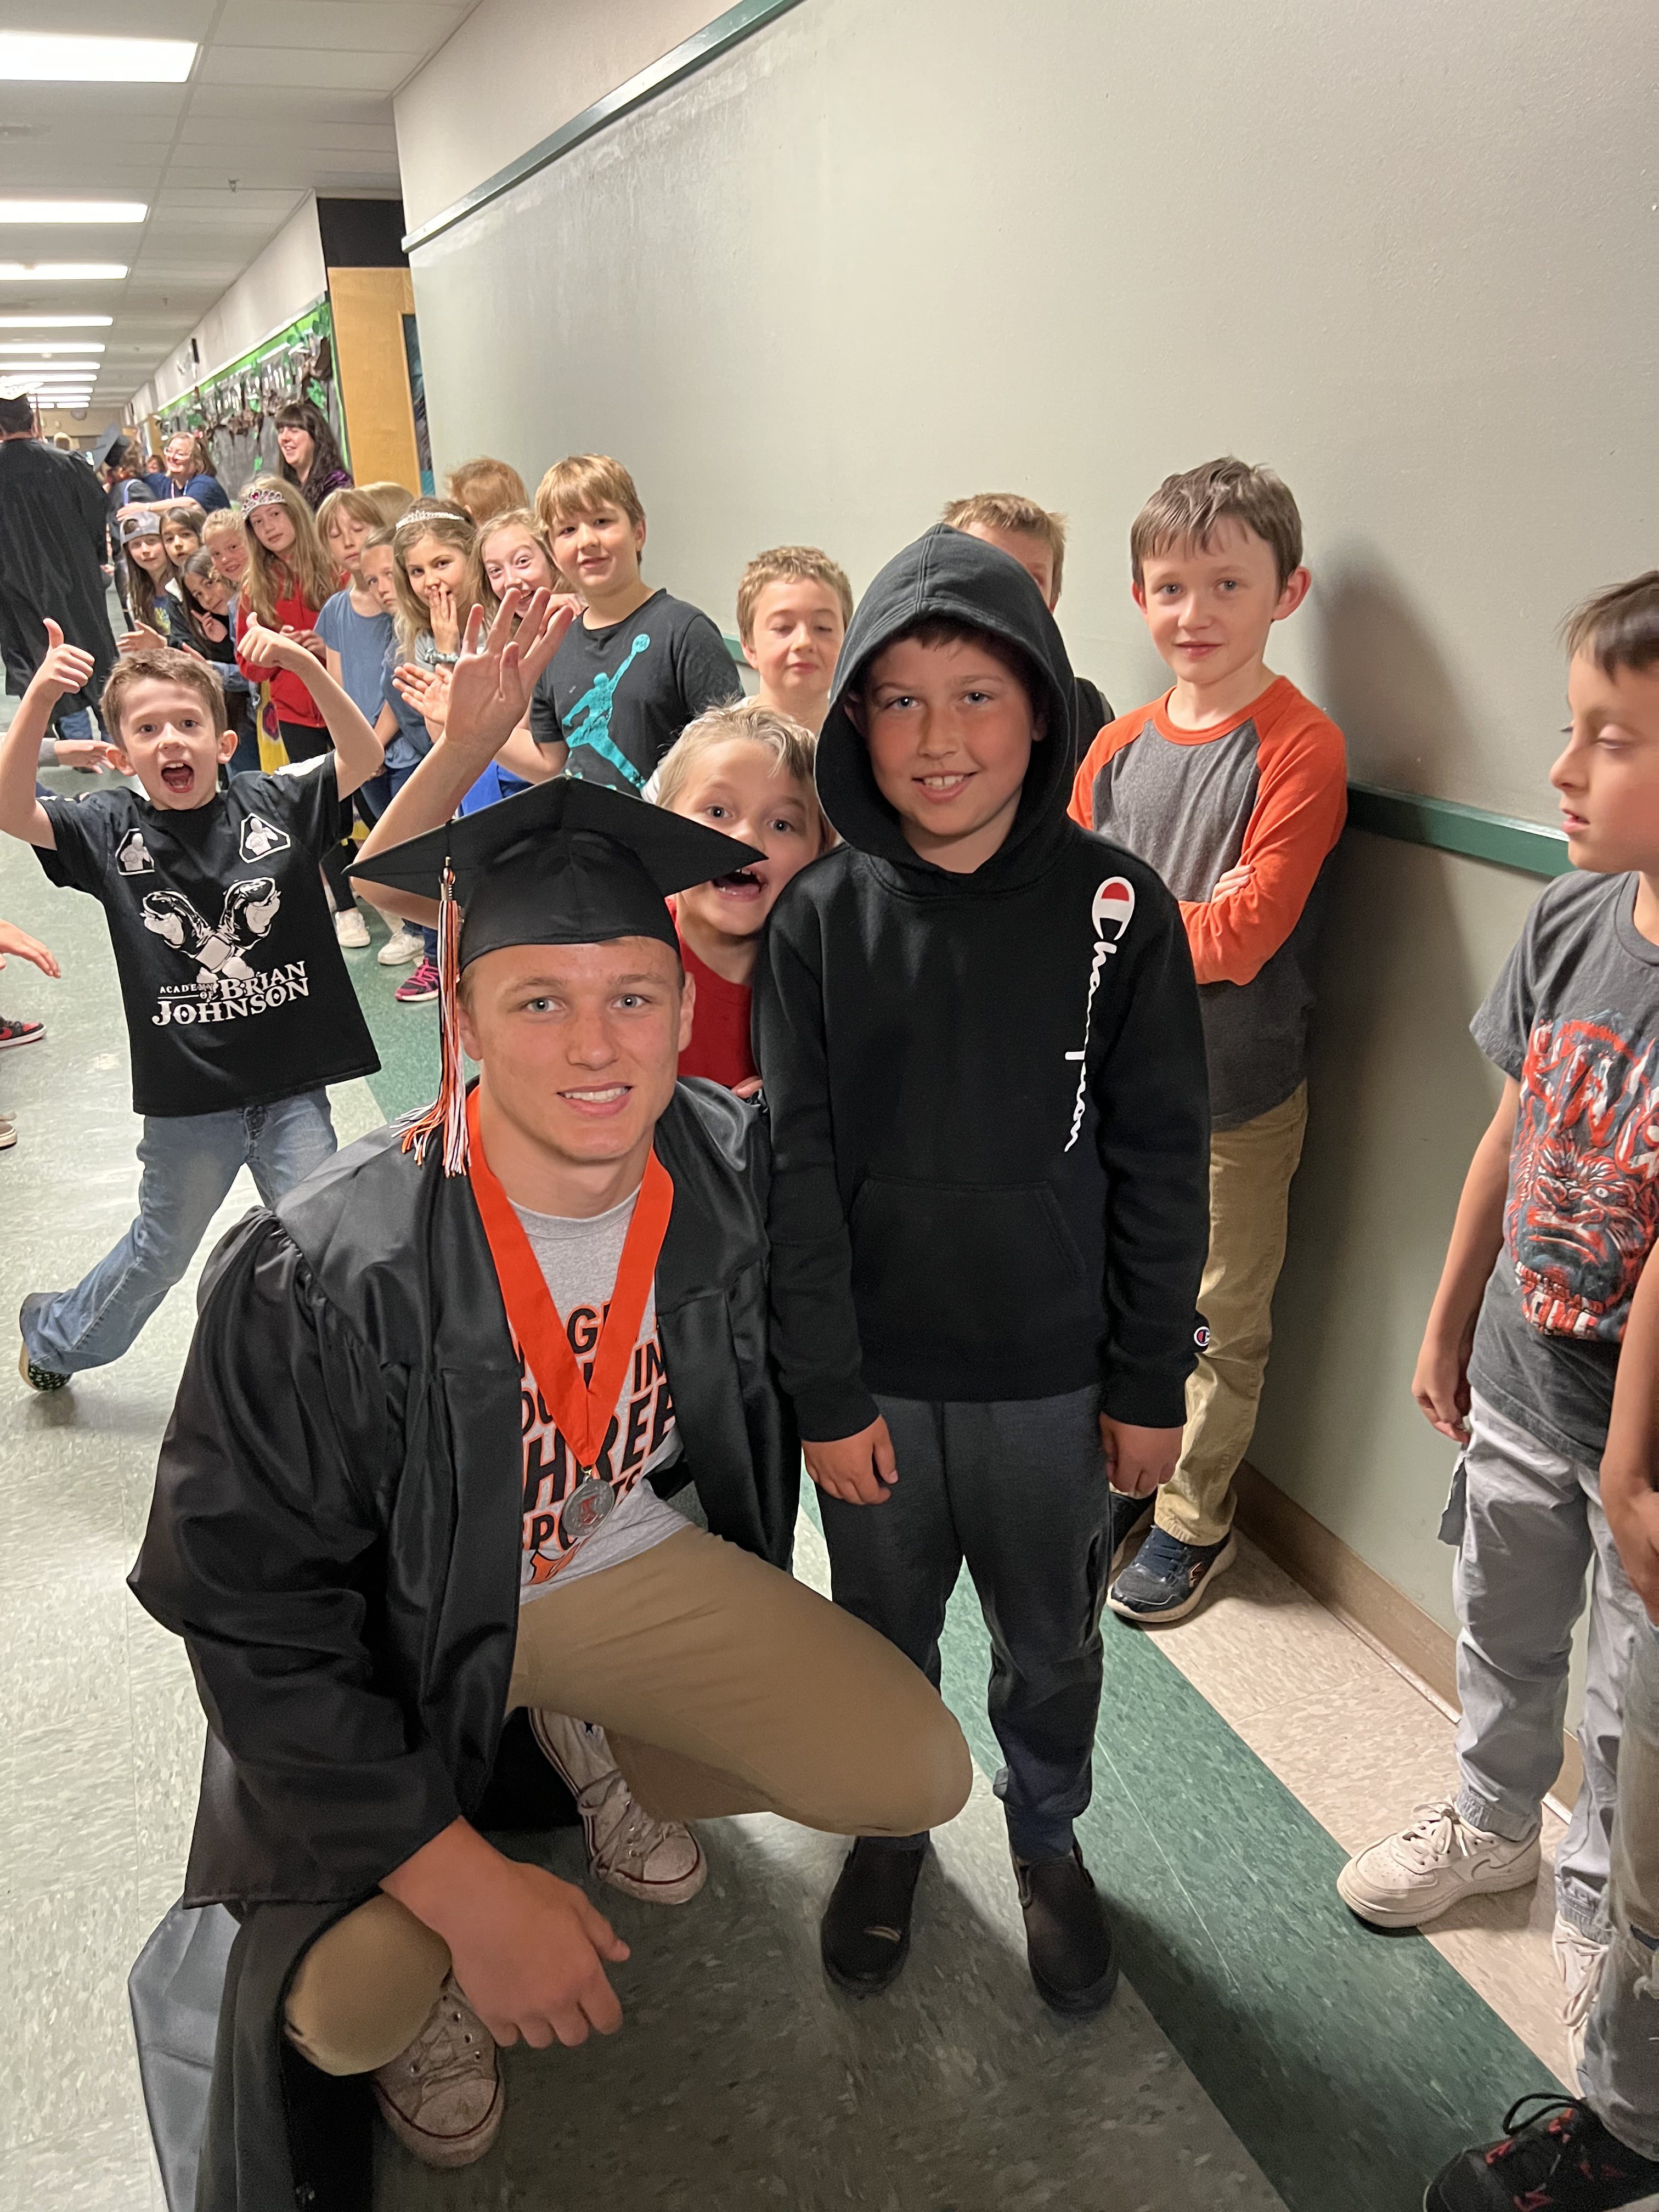 Graduate poses with younger students in hallway